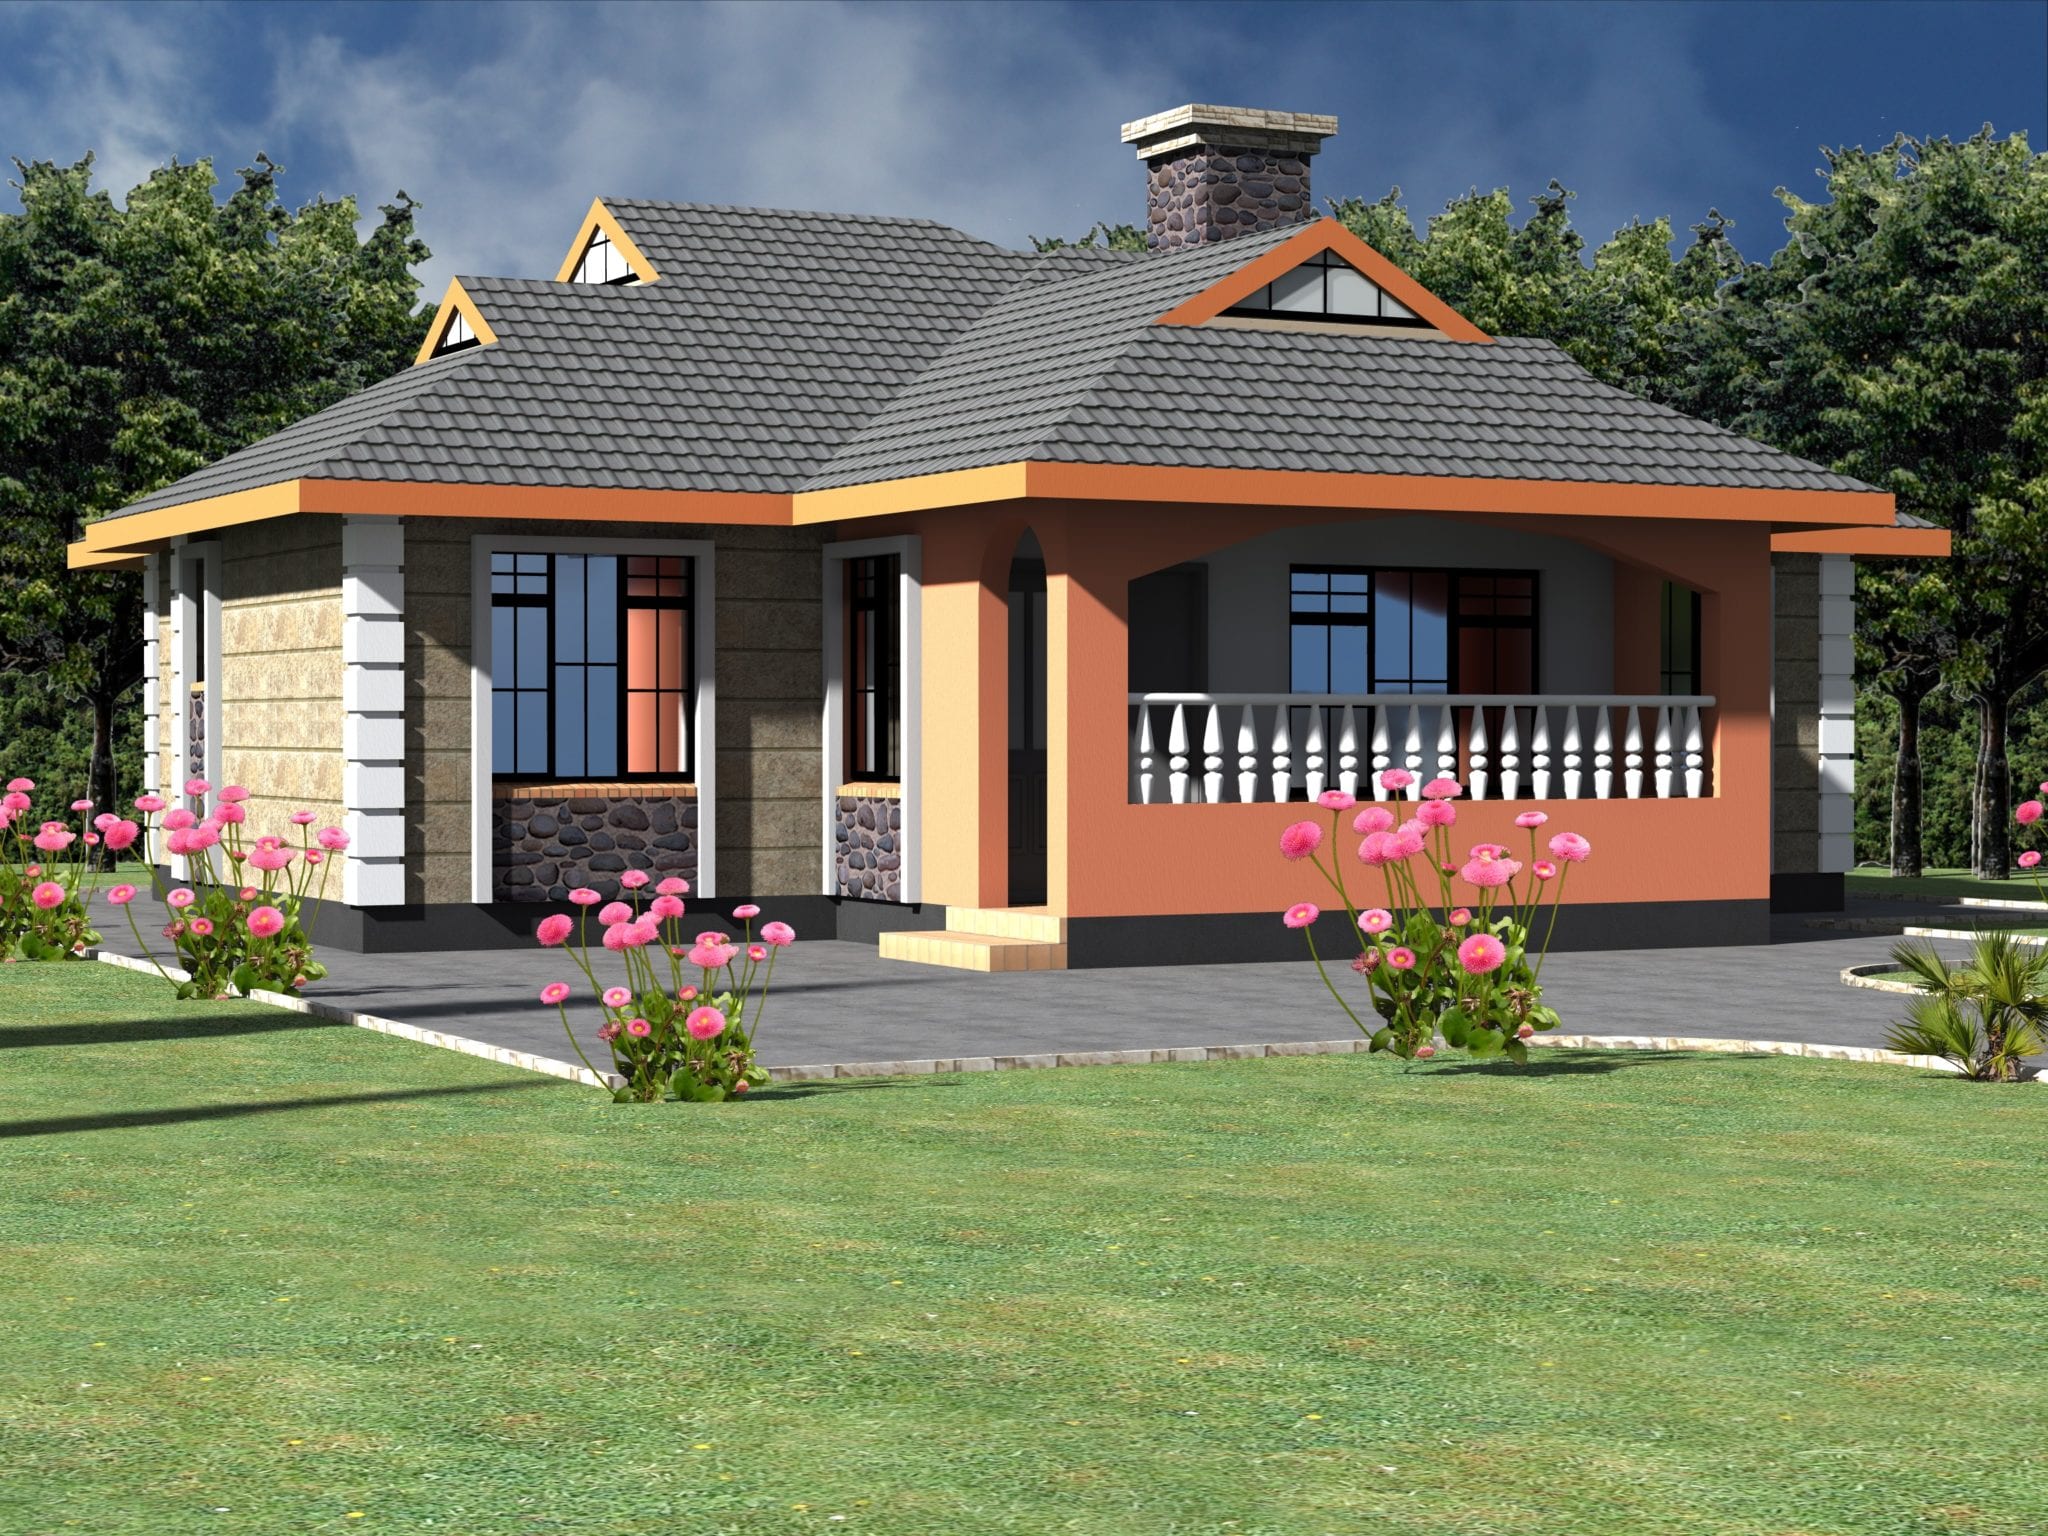 Simple And Best House Designs House Simple Storiestrending The Art Of